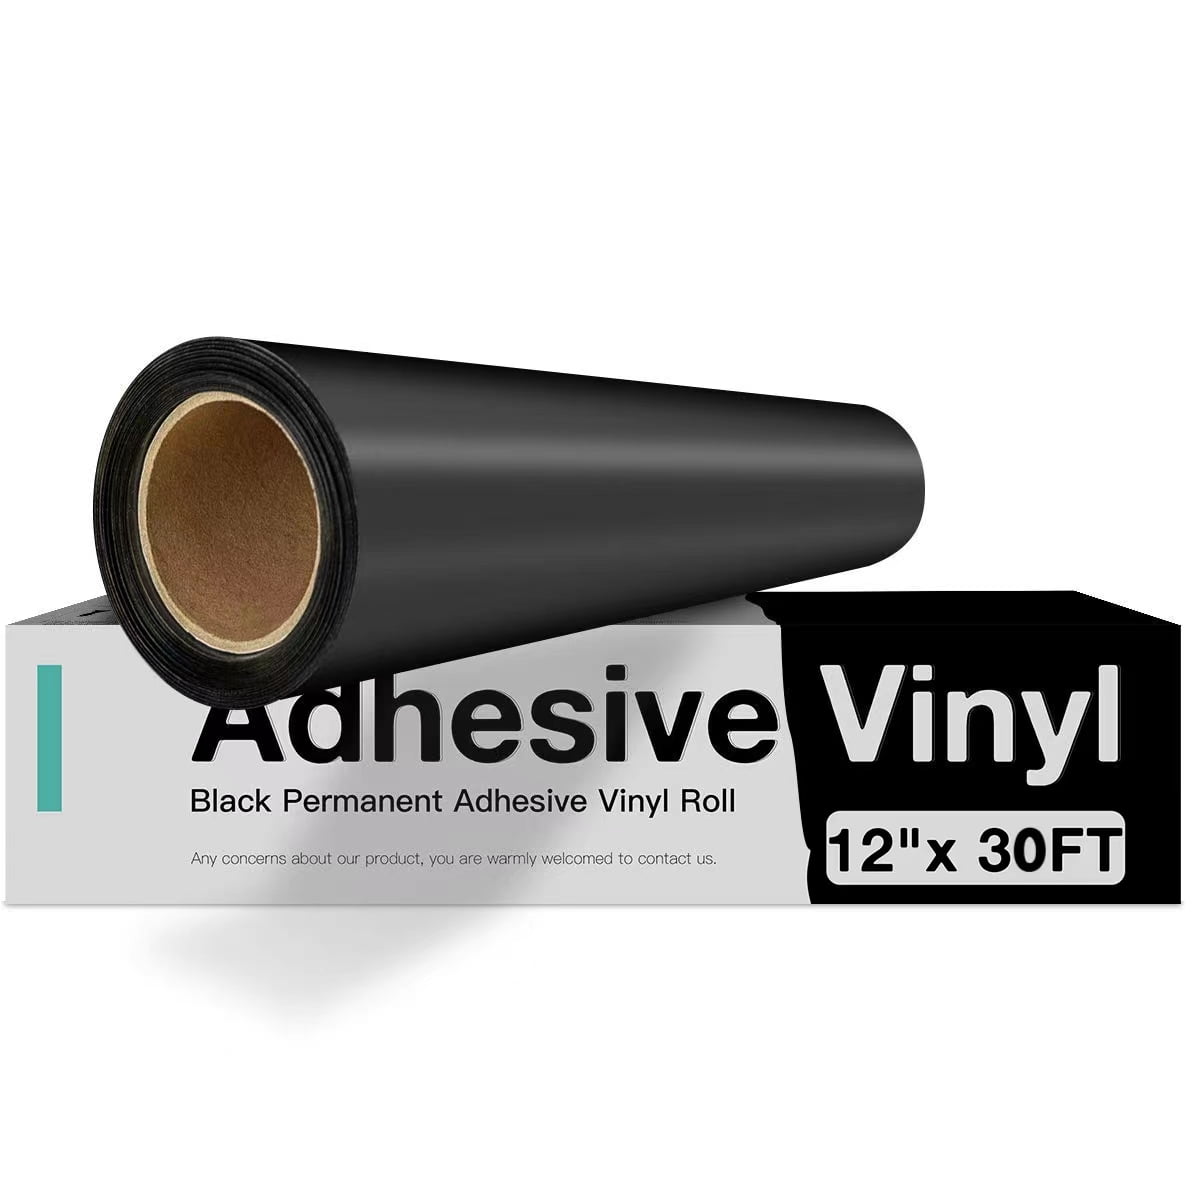 HTVRONT Black Vinyl for Cricut Permanent Vinyl Roll - 12 inch x 30ft Black Adhesive Vinyl for Craft Cutter, Decal, Signs, Stickers (Glossy Black)